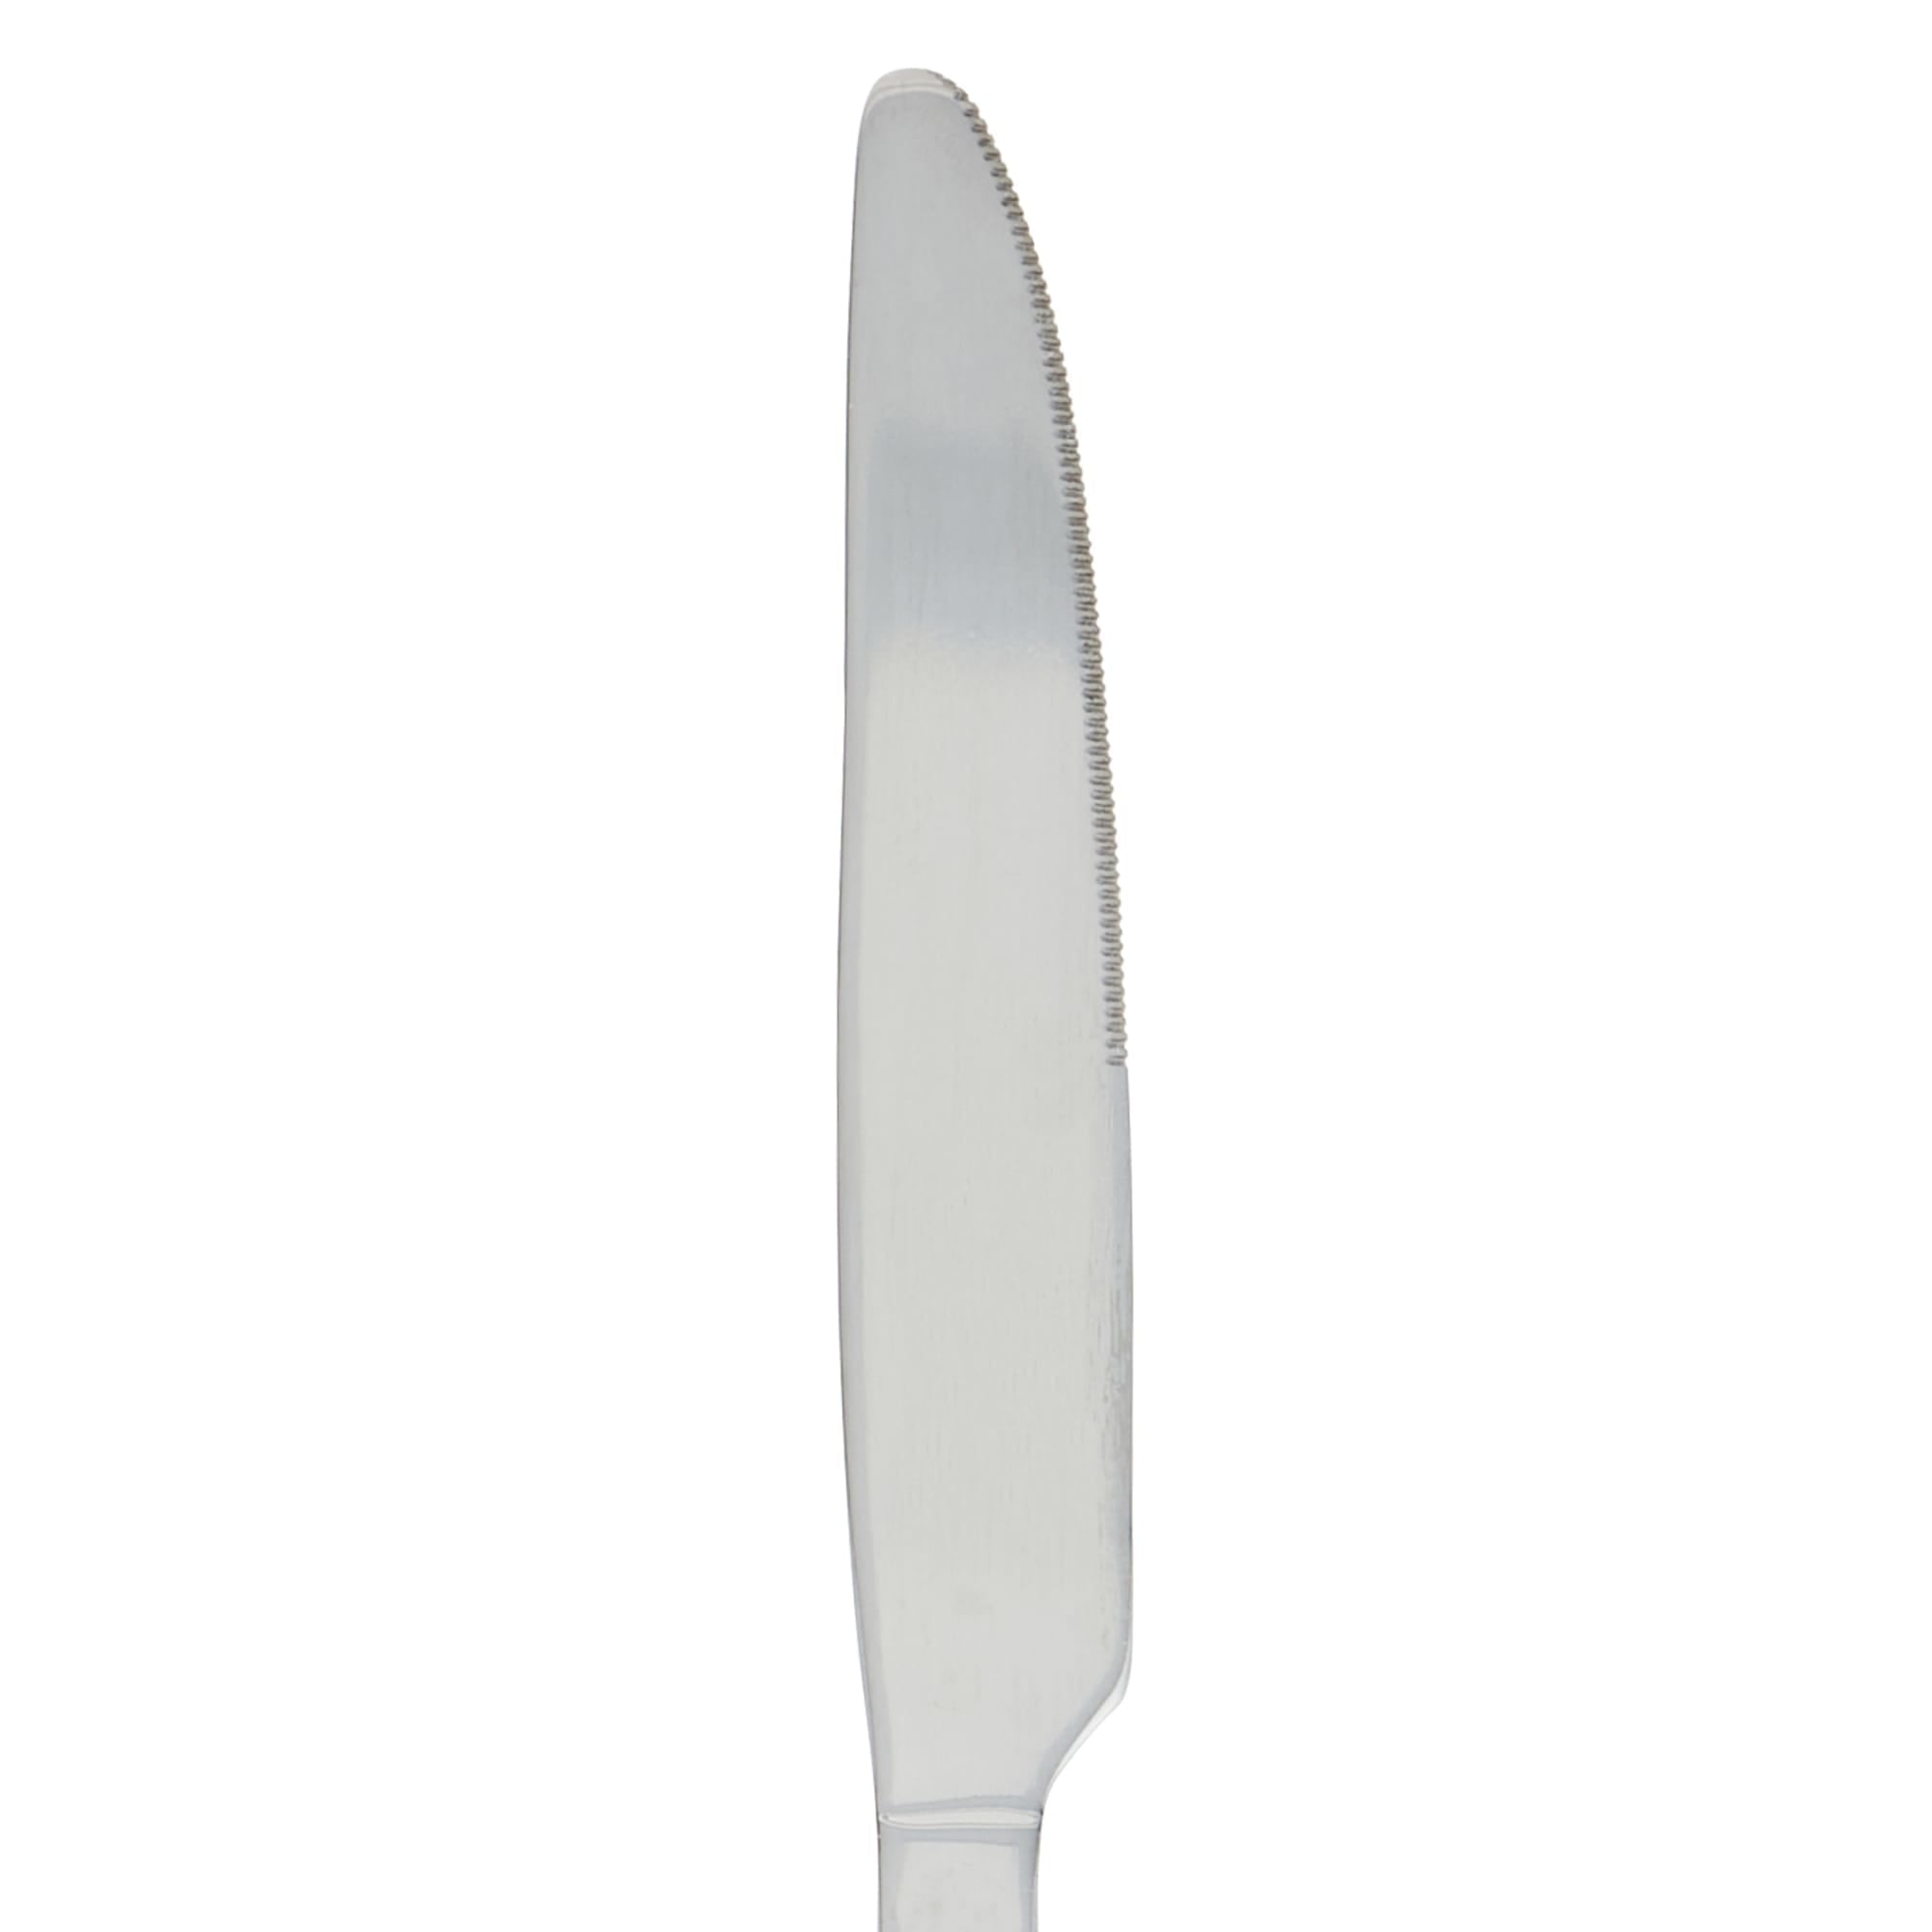 Home Basics Hammered Stainless Steel Dinner Knives, (Pack of 4), Silver $2.00 EACH, CASE PACK OF 24